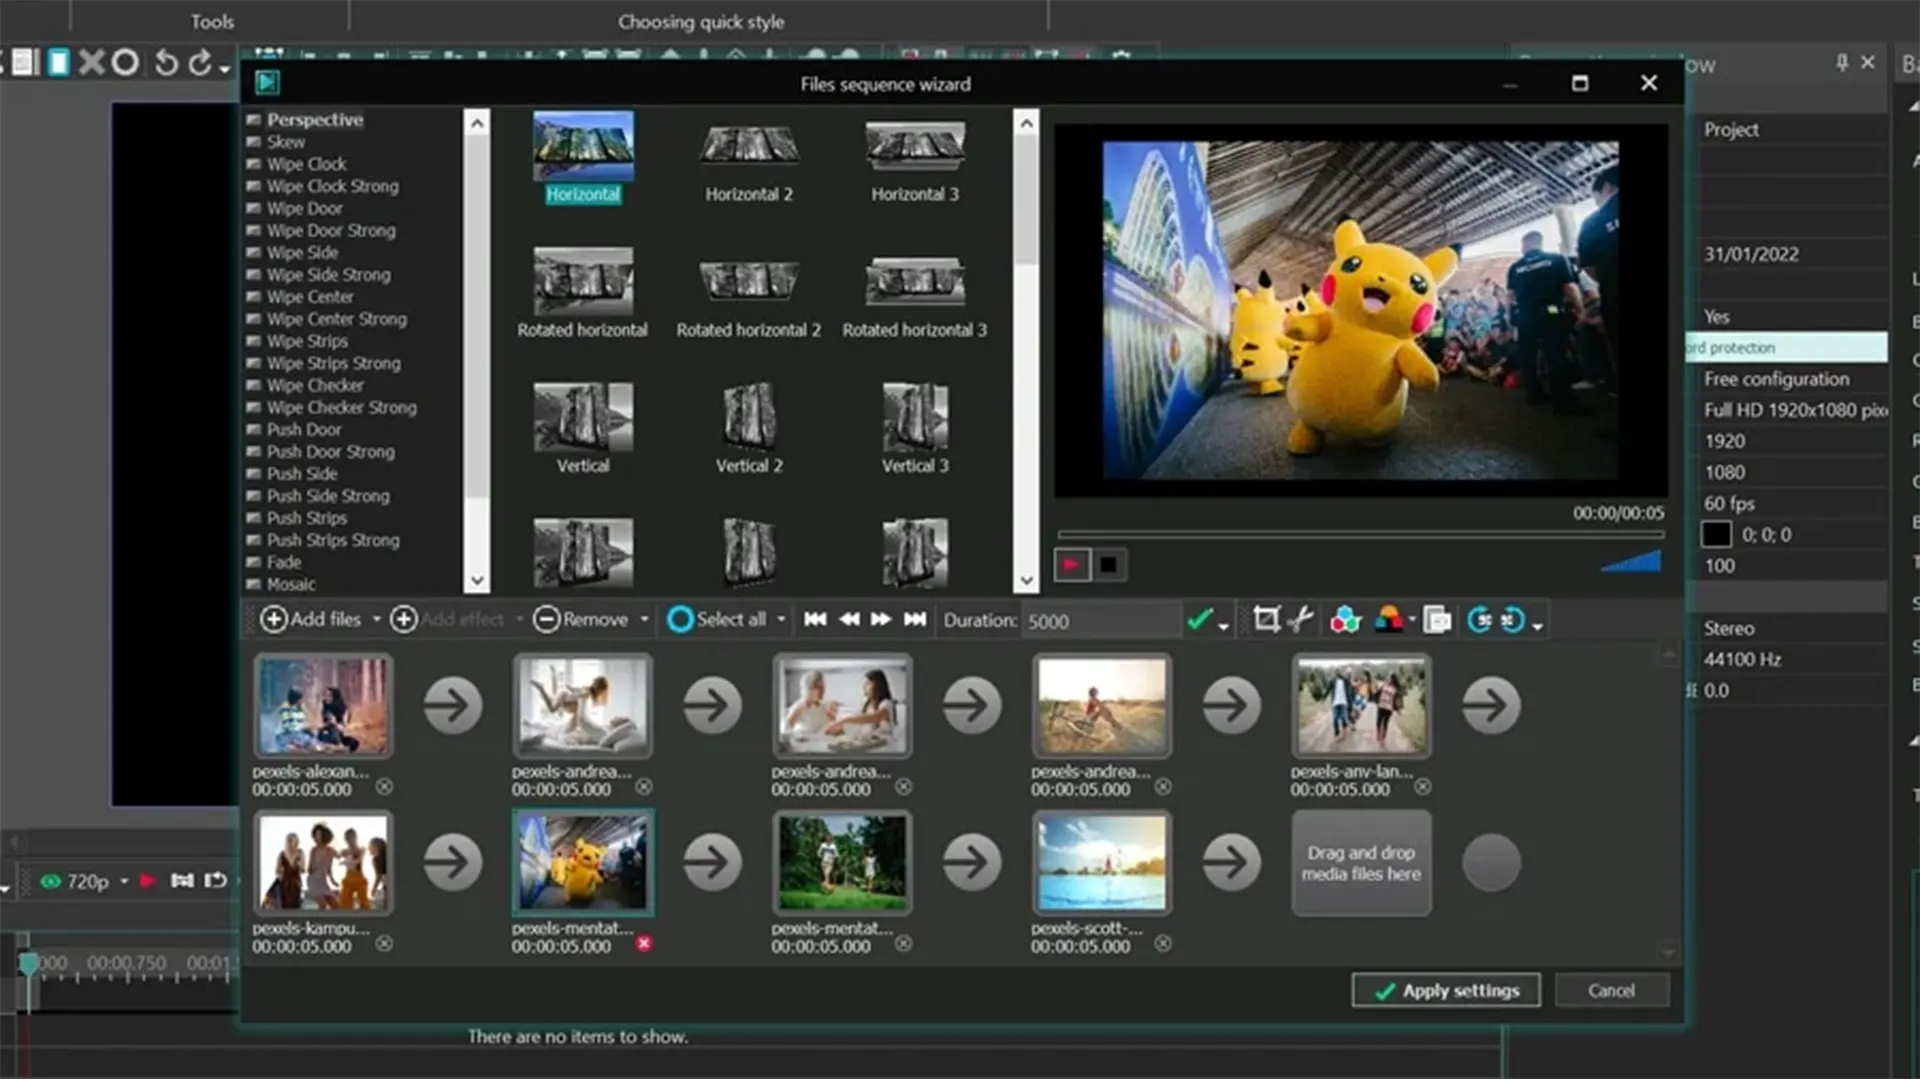 VSDC - The best video editing software for beginners on low-powered PCs